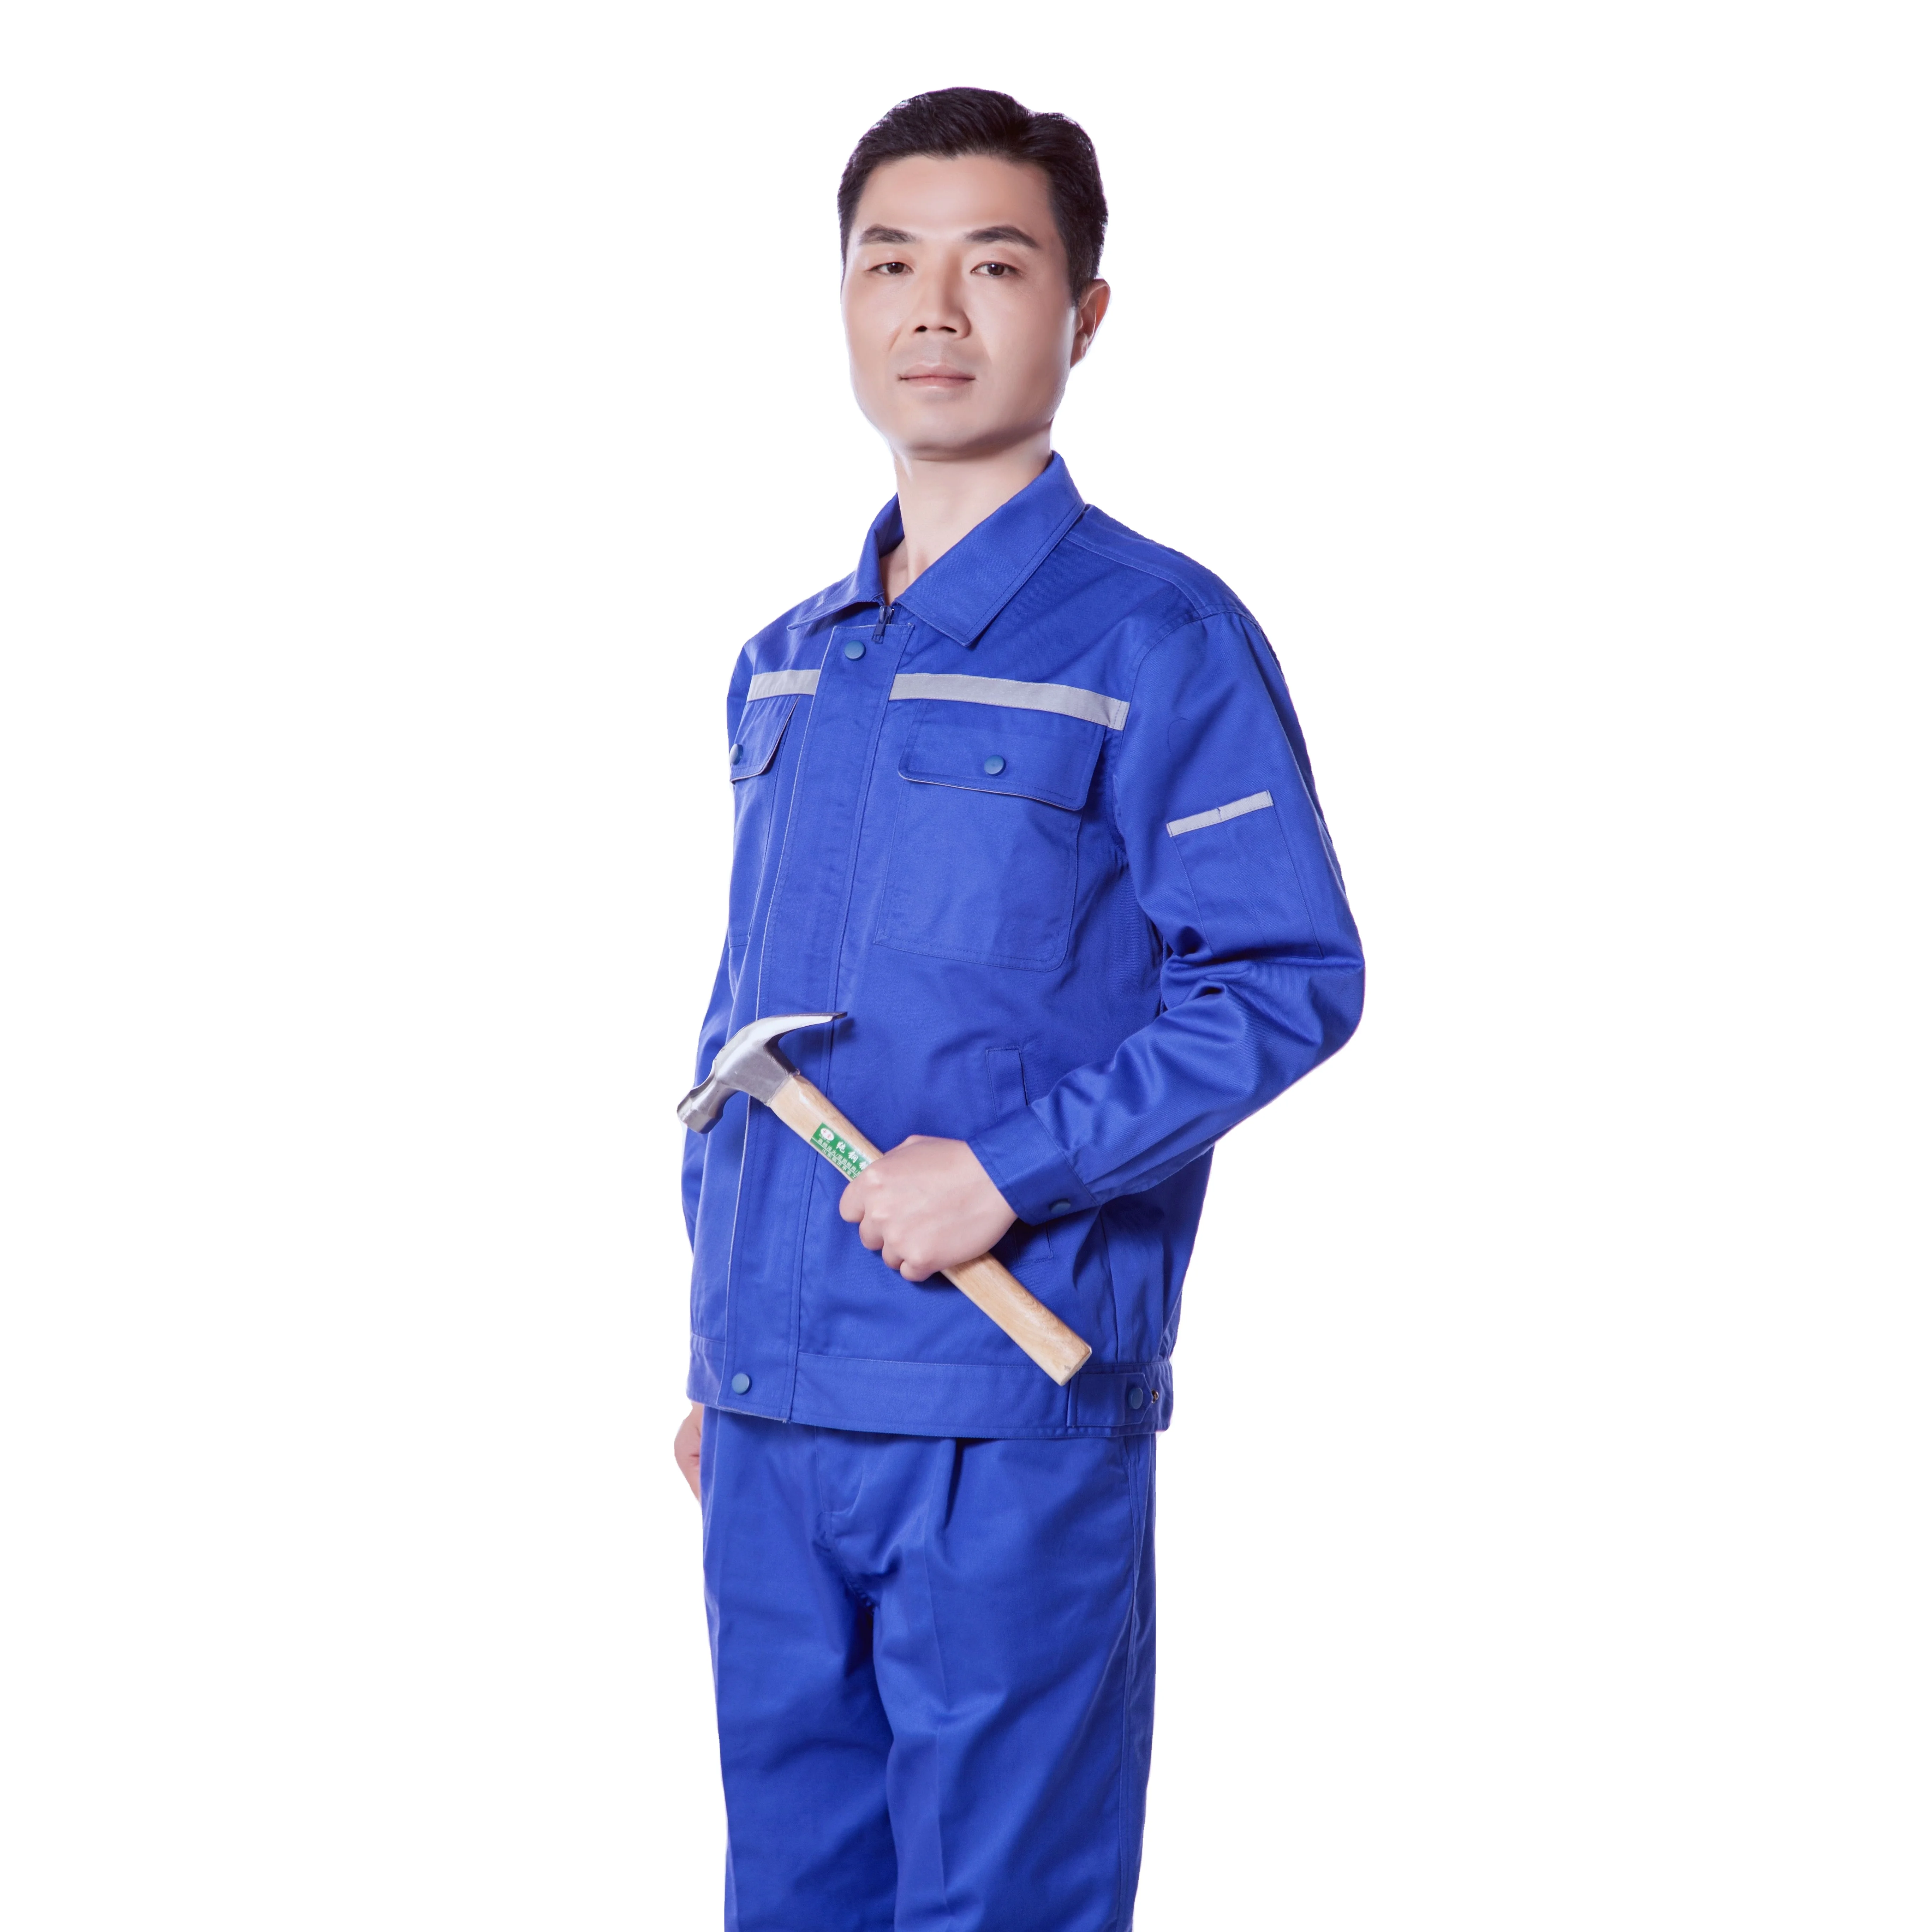 

Easy to wash Working Clothes long sleeves workwear OEM reflective work uniforms, Brilliant blue